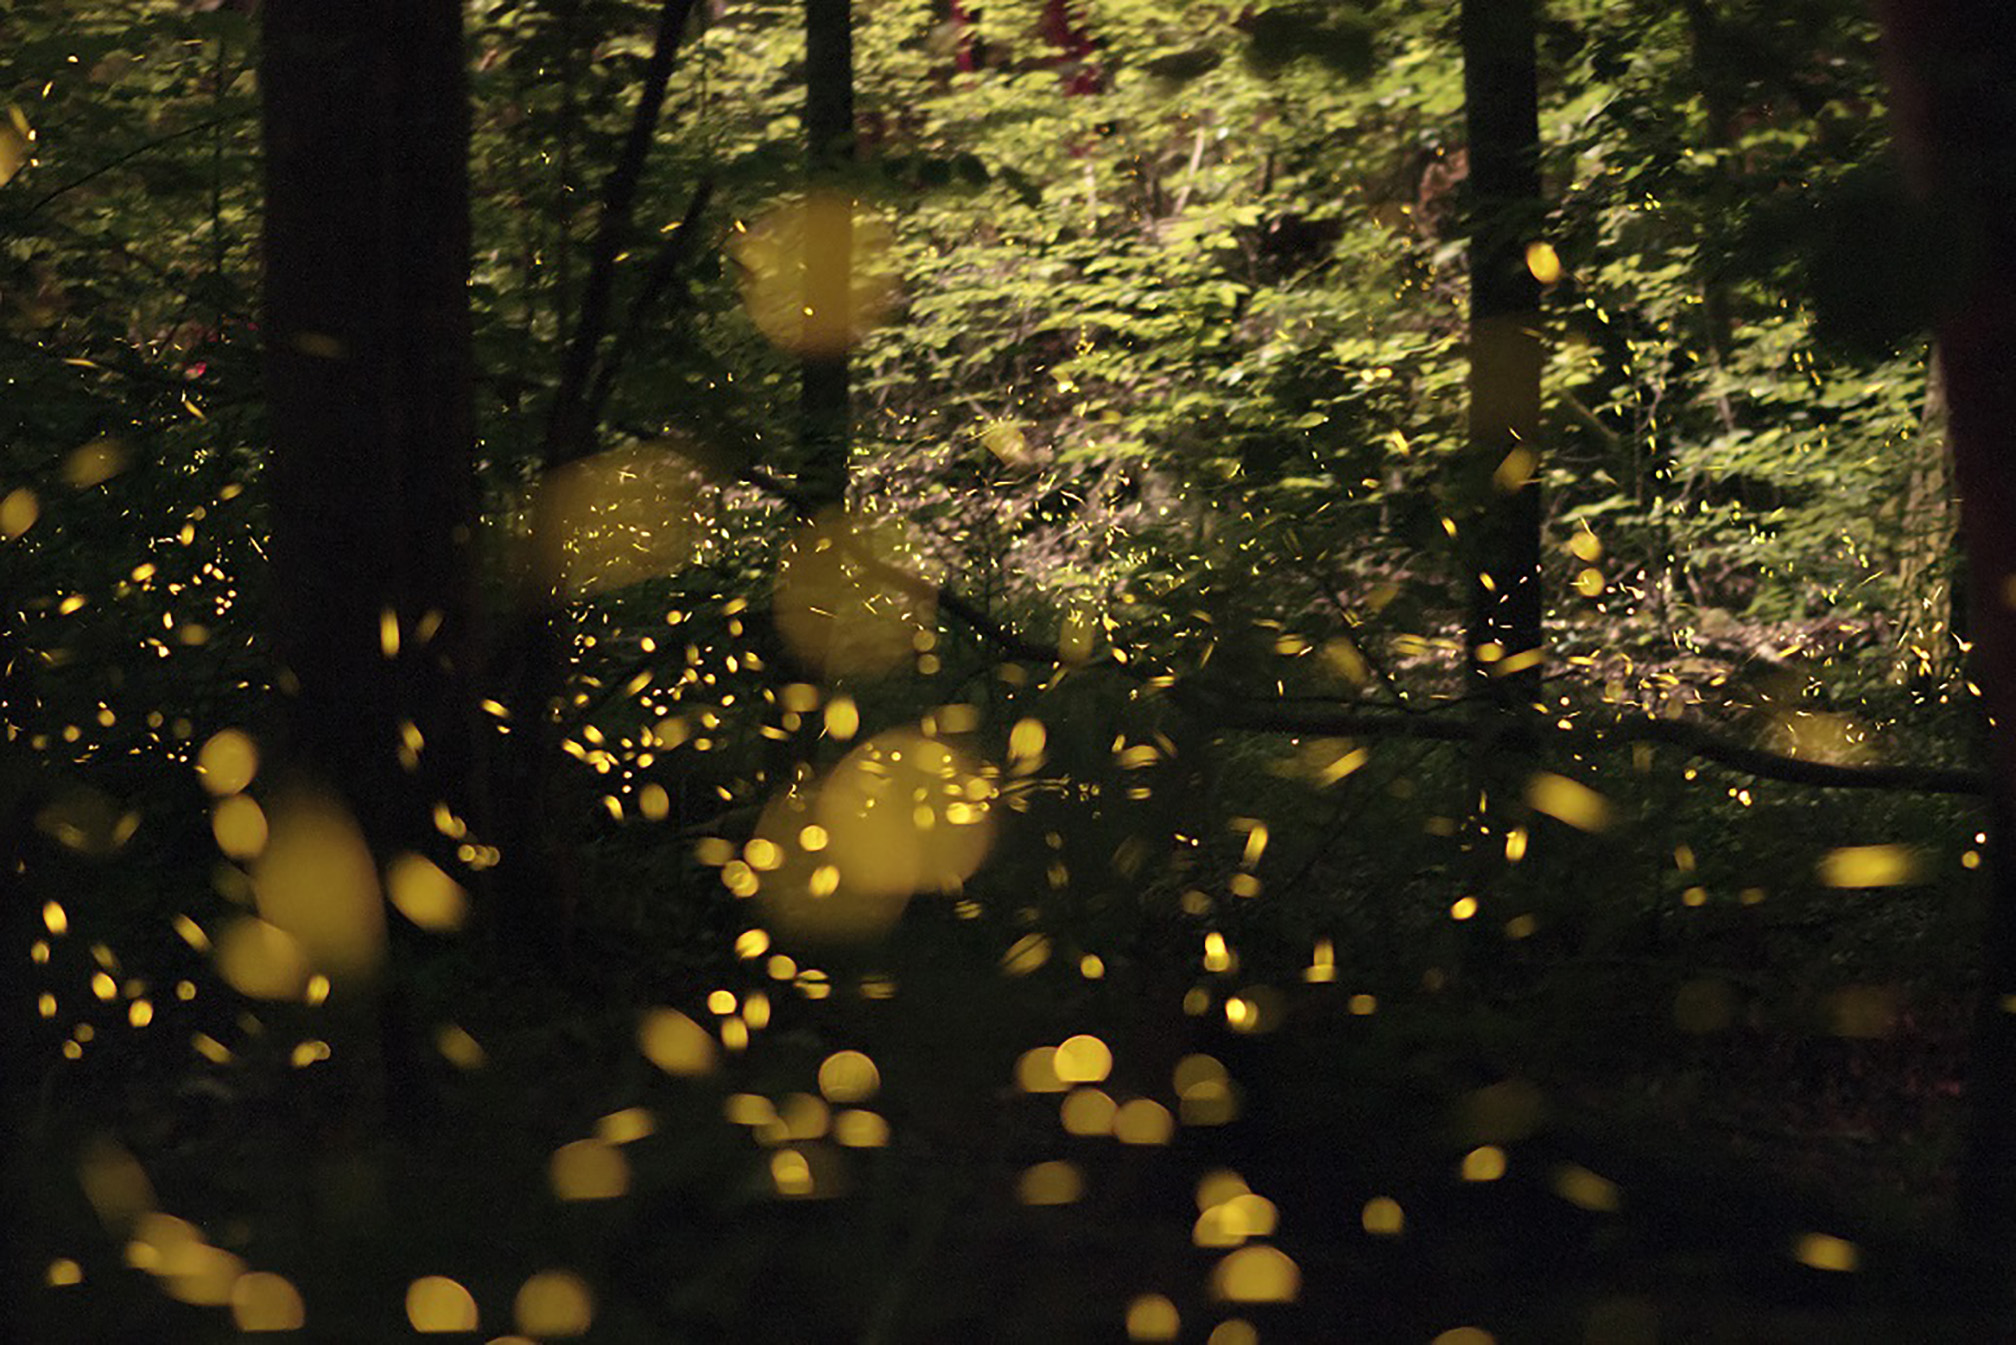 The darkness of a forests in the evening is lit up by hundreds of spots of yellow light, the massed flashes of fireflies